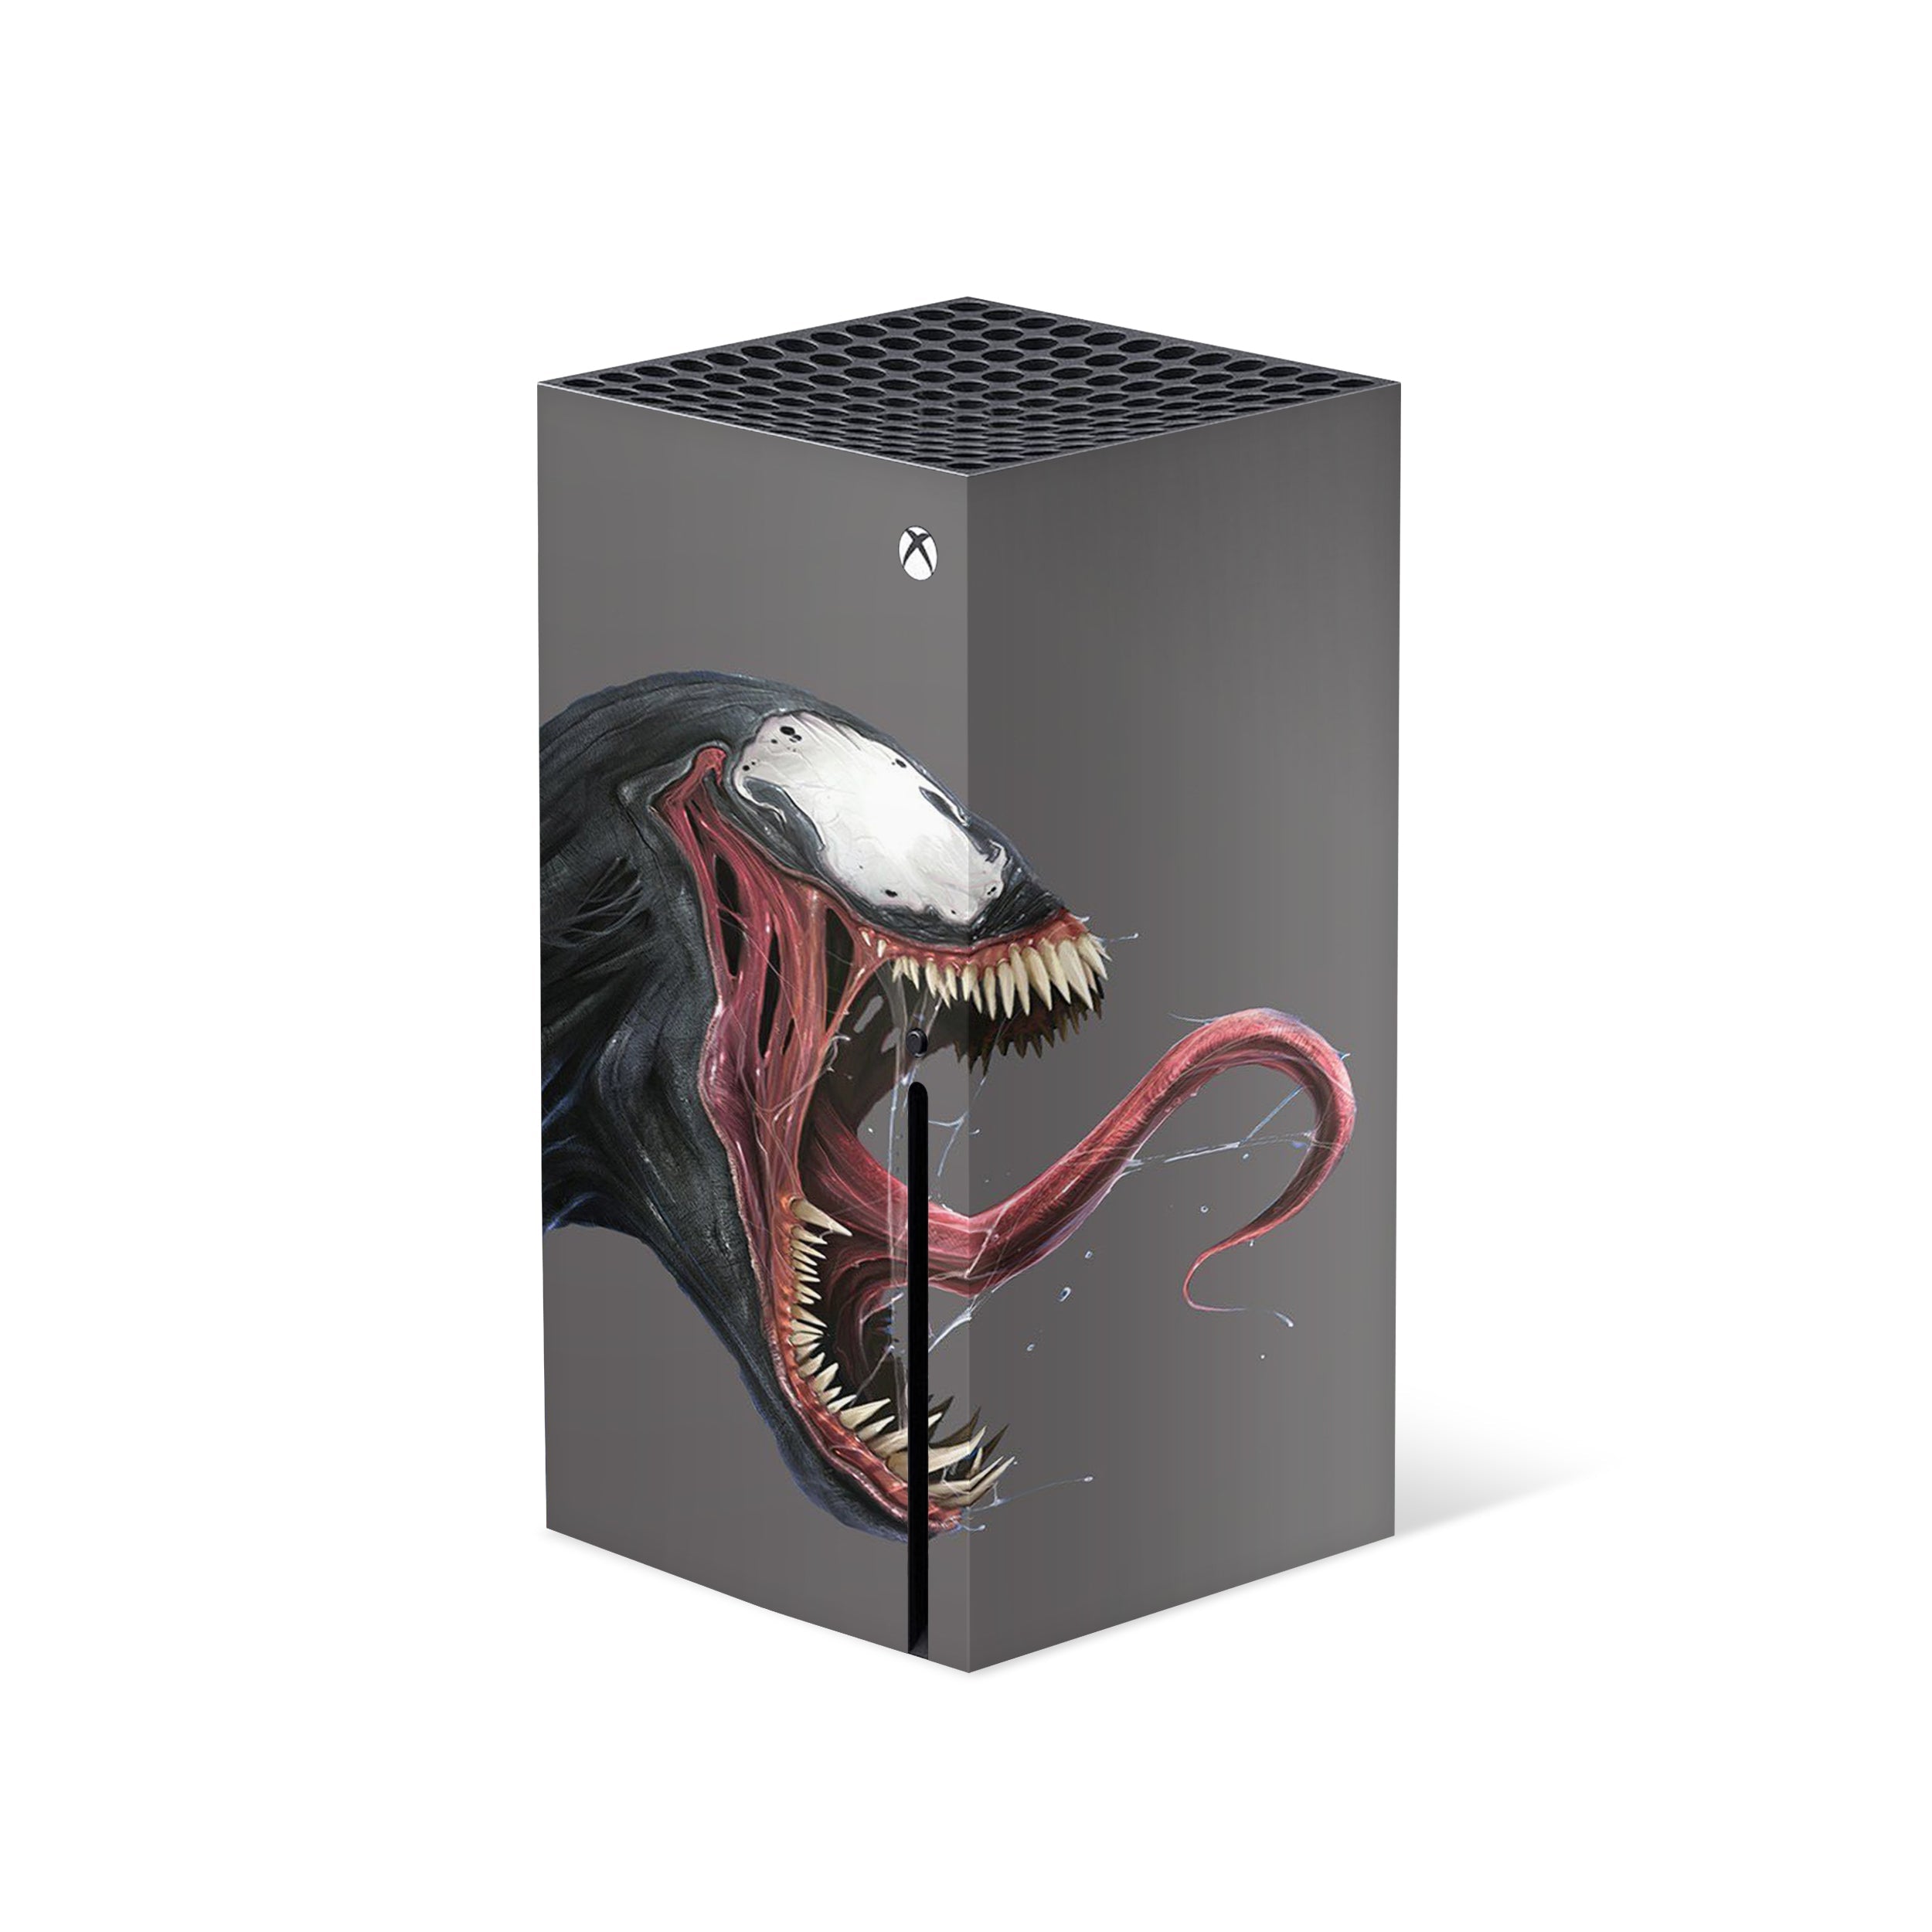 A video game skin featuring a Marvel Venom design for the Xbox Series X.